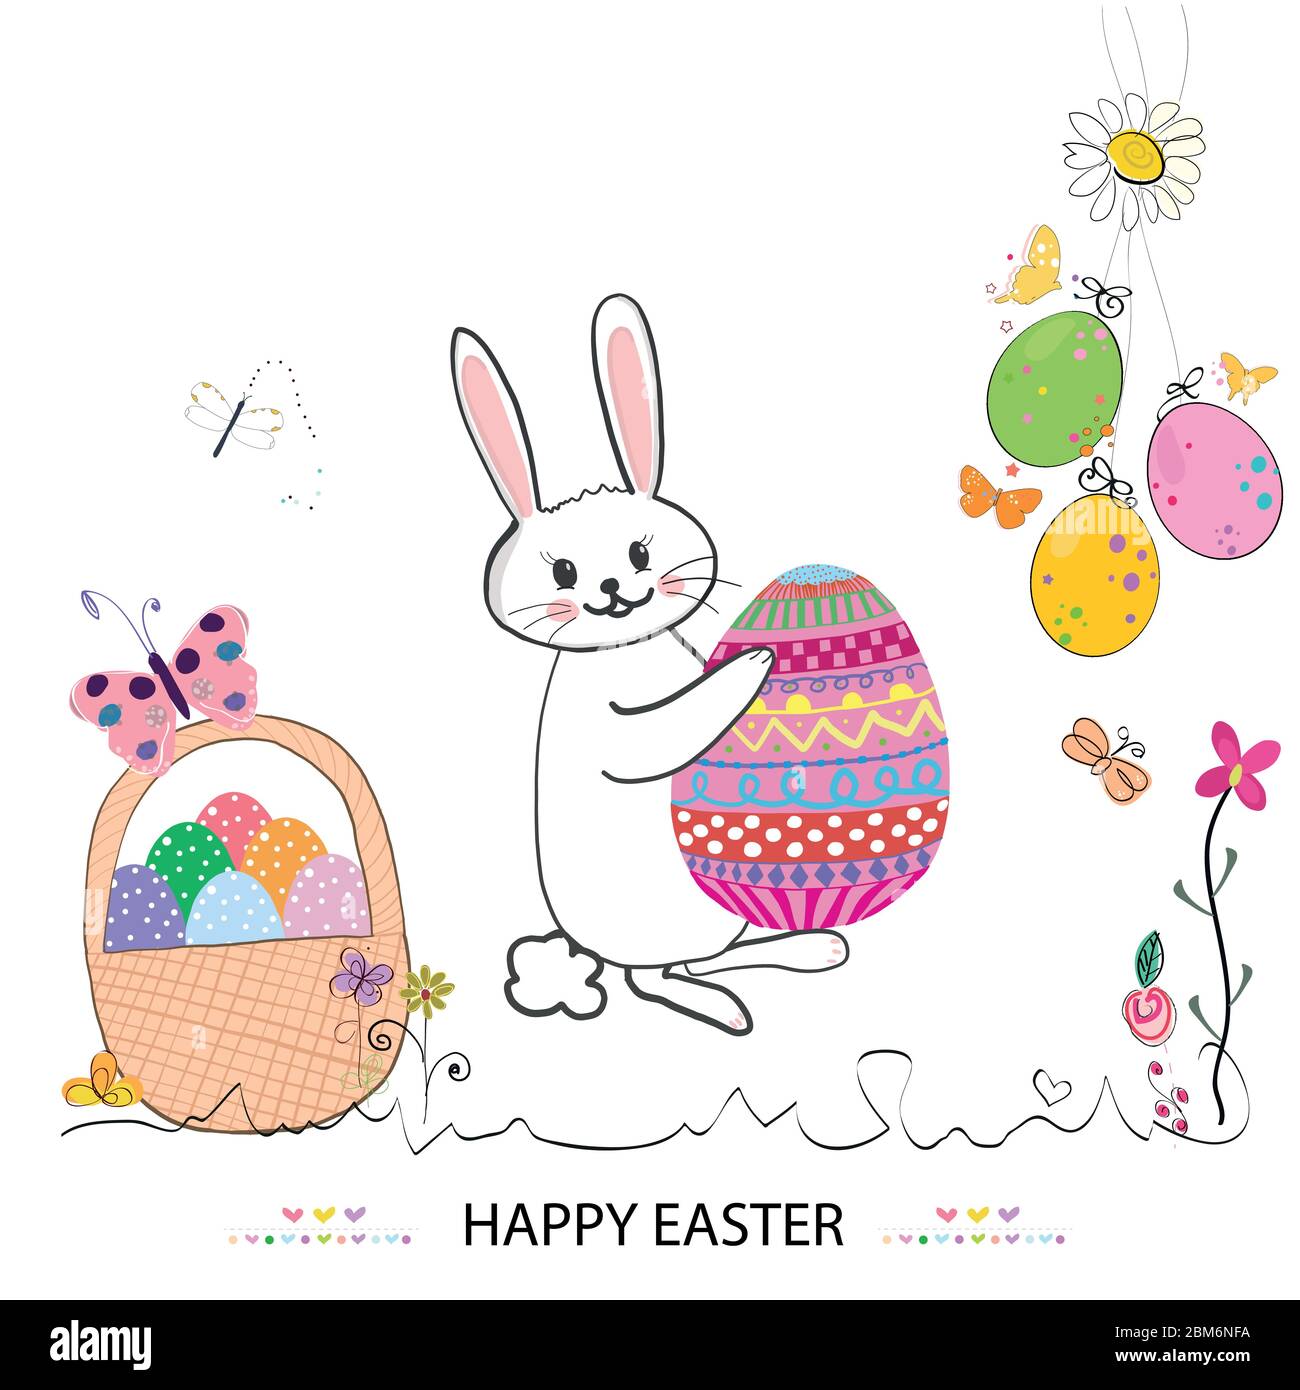 Bunny carrying an easter egg. Colorful Happy Easter greeting card with cute bunny, flowers and hanging eggs vector background.eps Stock Vector